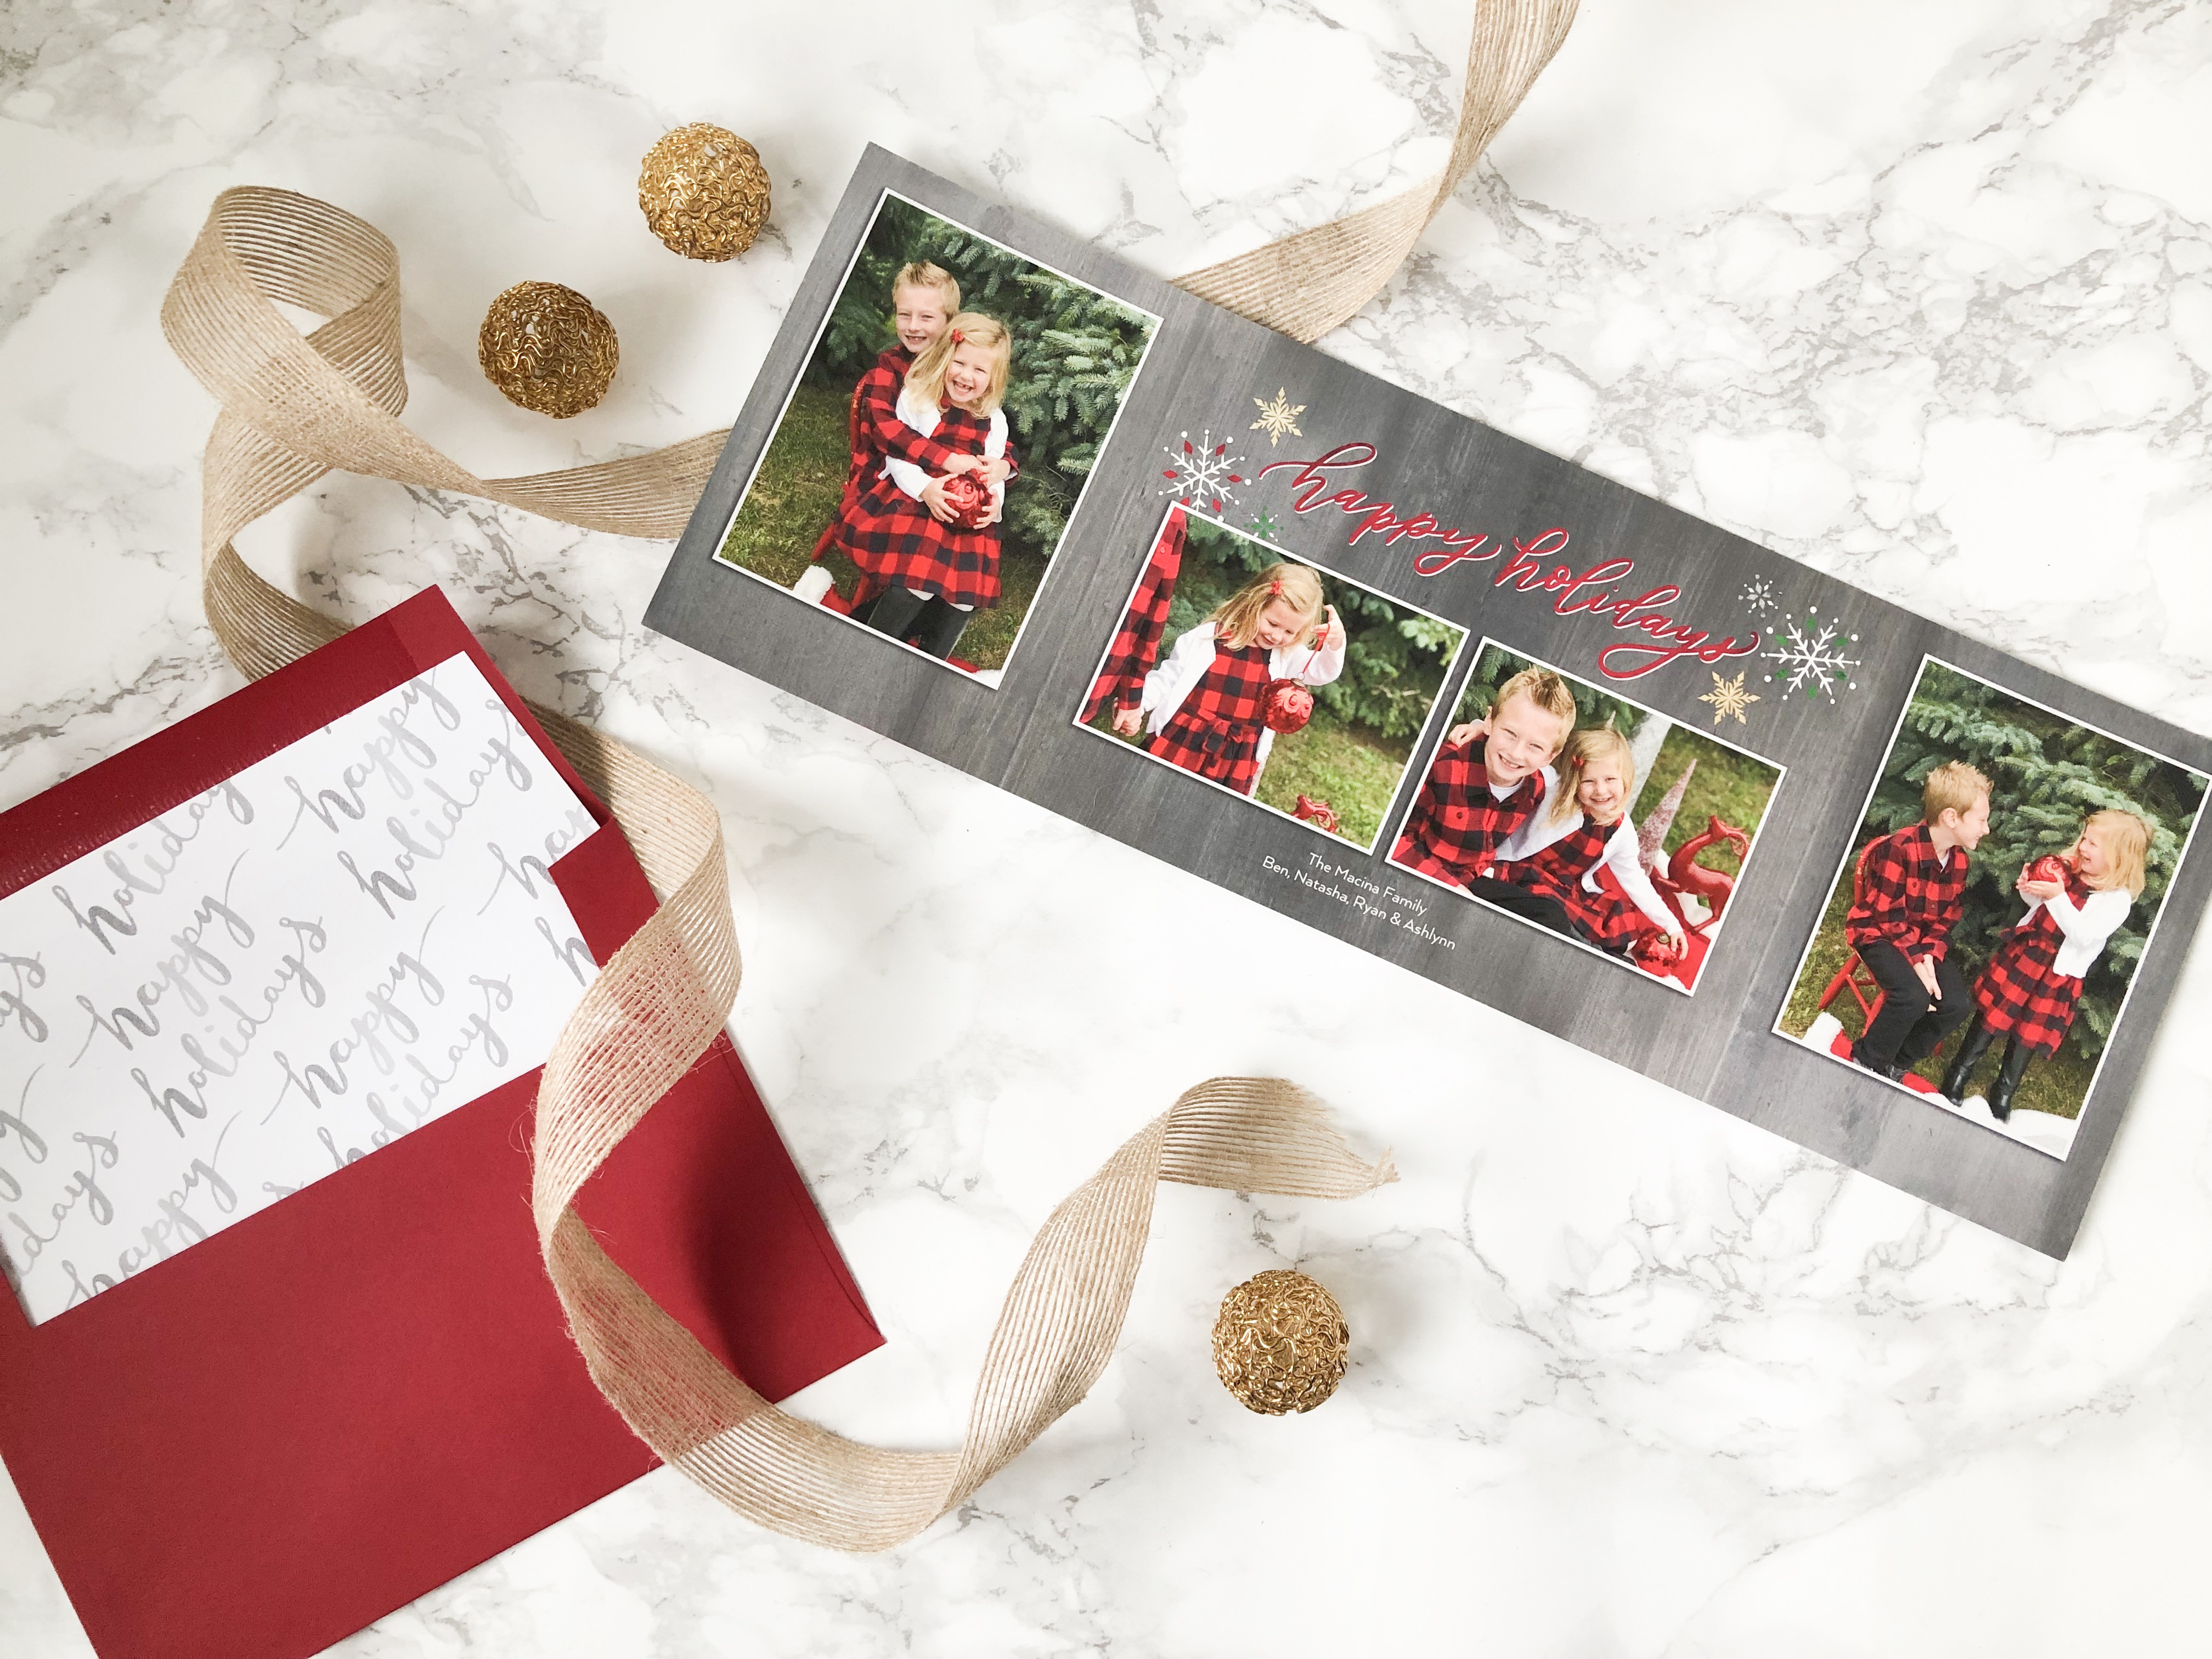 Christmas Cards from Shutterfly on Livin' Life with Style